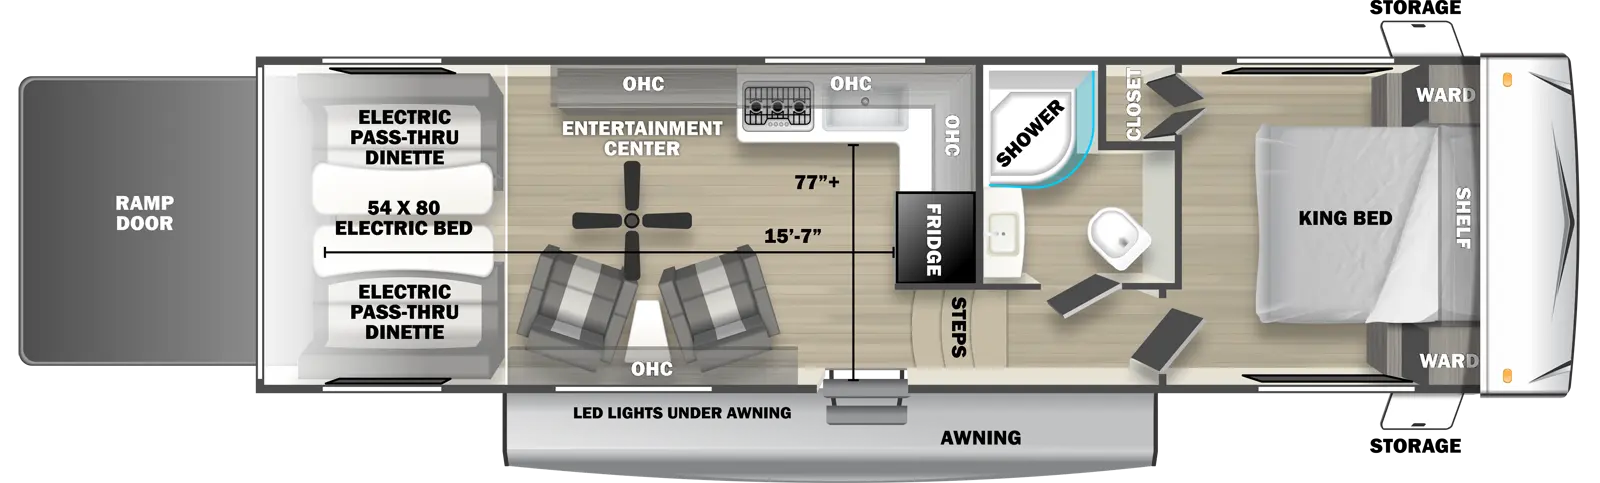 The 2710SLX fifth wheel has no slide outs, 1 entry door and 1 rear ramp door. Exterior features include an awning with LED lights and front opposing side storage access. Interior layout from front to back includes front bedroom with foot-facing King bed, shelf over the bed, front corner wardrobes and front facing closet; off-door side bathroom with radius shower, toilet and single sink vanity; 3 steps down into the kitchen area with off-door side L-shaped countertop, stovetop, L-Shaped overhead cabinets, sink and rear facing refrigerator; 2 door side recliners with end table; ceiling fan; off-door side entertainment center with overhead cabinet; and rear 54 x 80 electric bed over electric pass-through dinette. Cargo length from rear of unit to refrigerator is 15 ft. 7 in. Cargo width from countertop to door side wall is 77 inches.